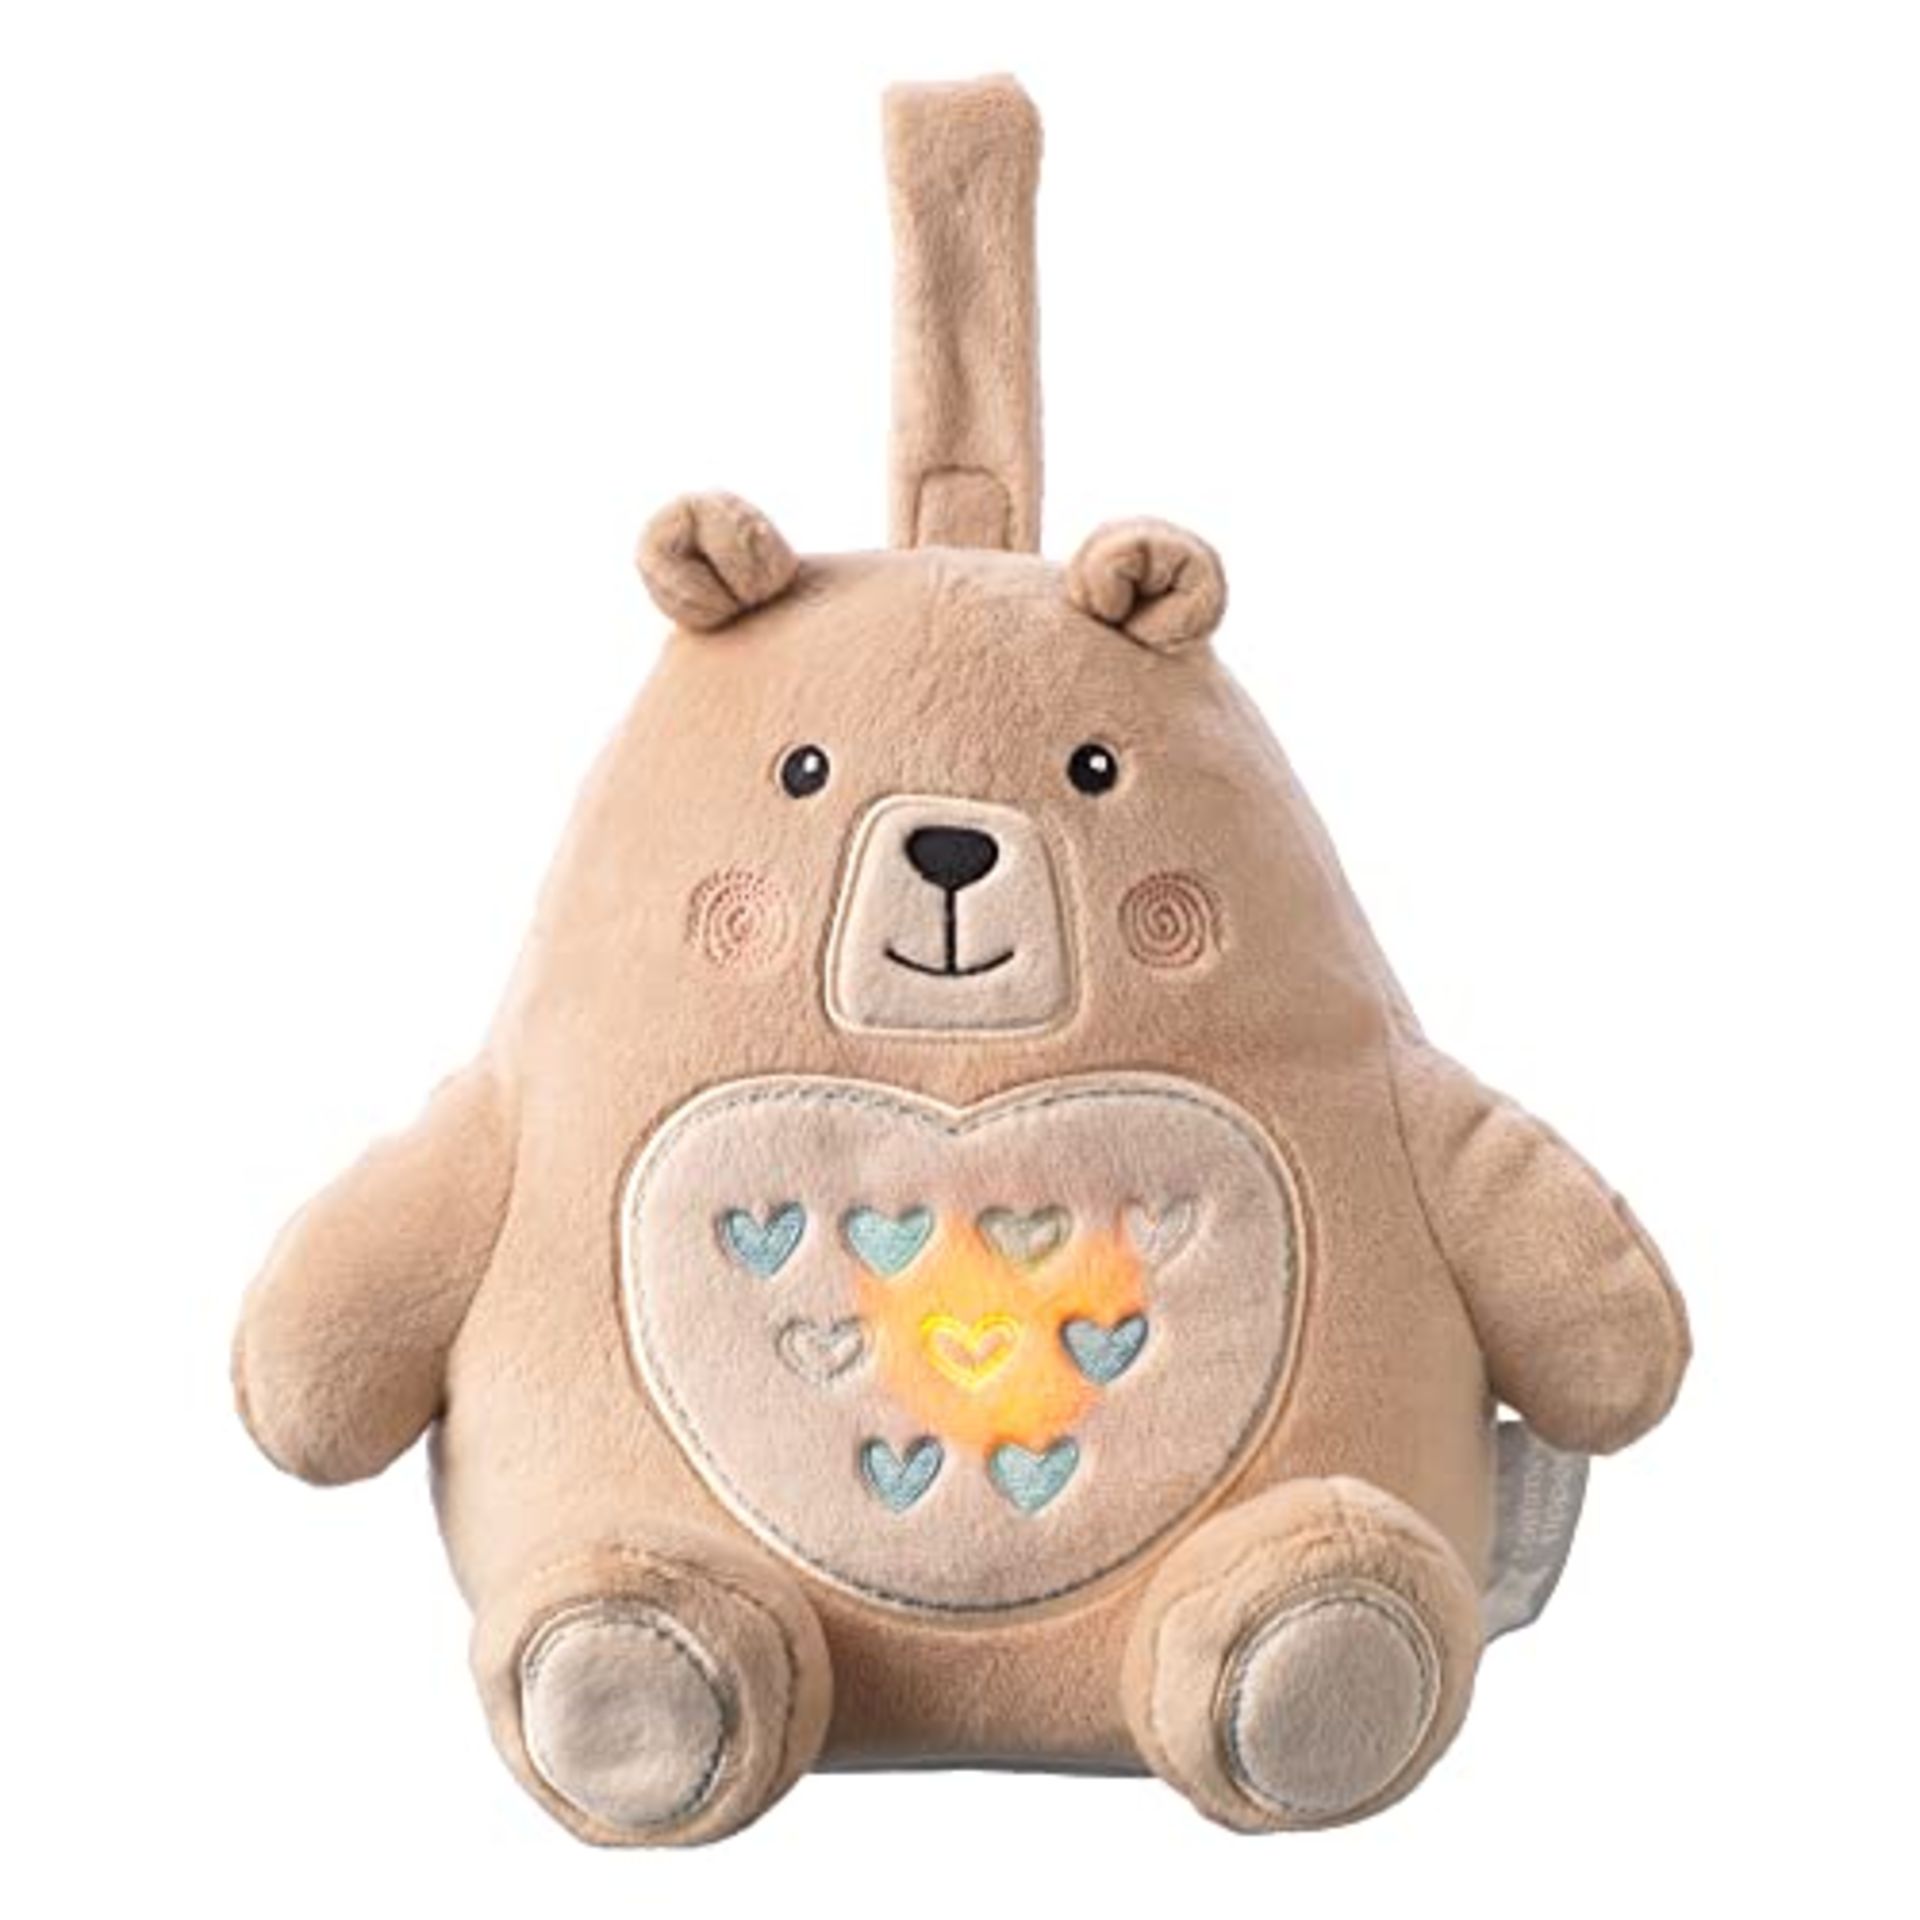 Tommee Tippee Bennie The Bear Grofriends is a rechargeable light and sound sleep aid.